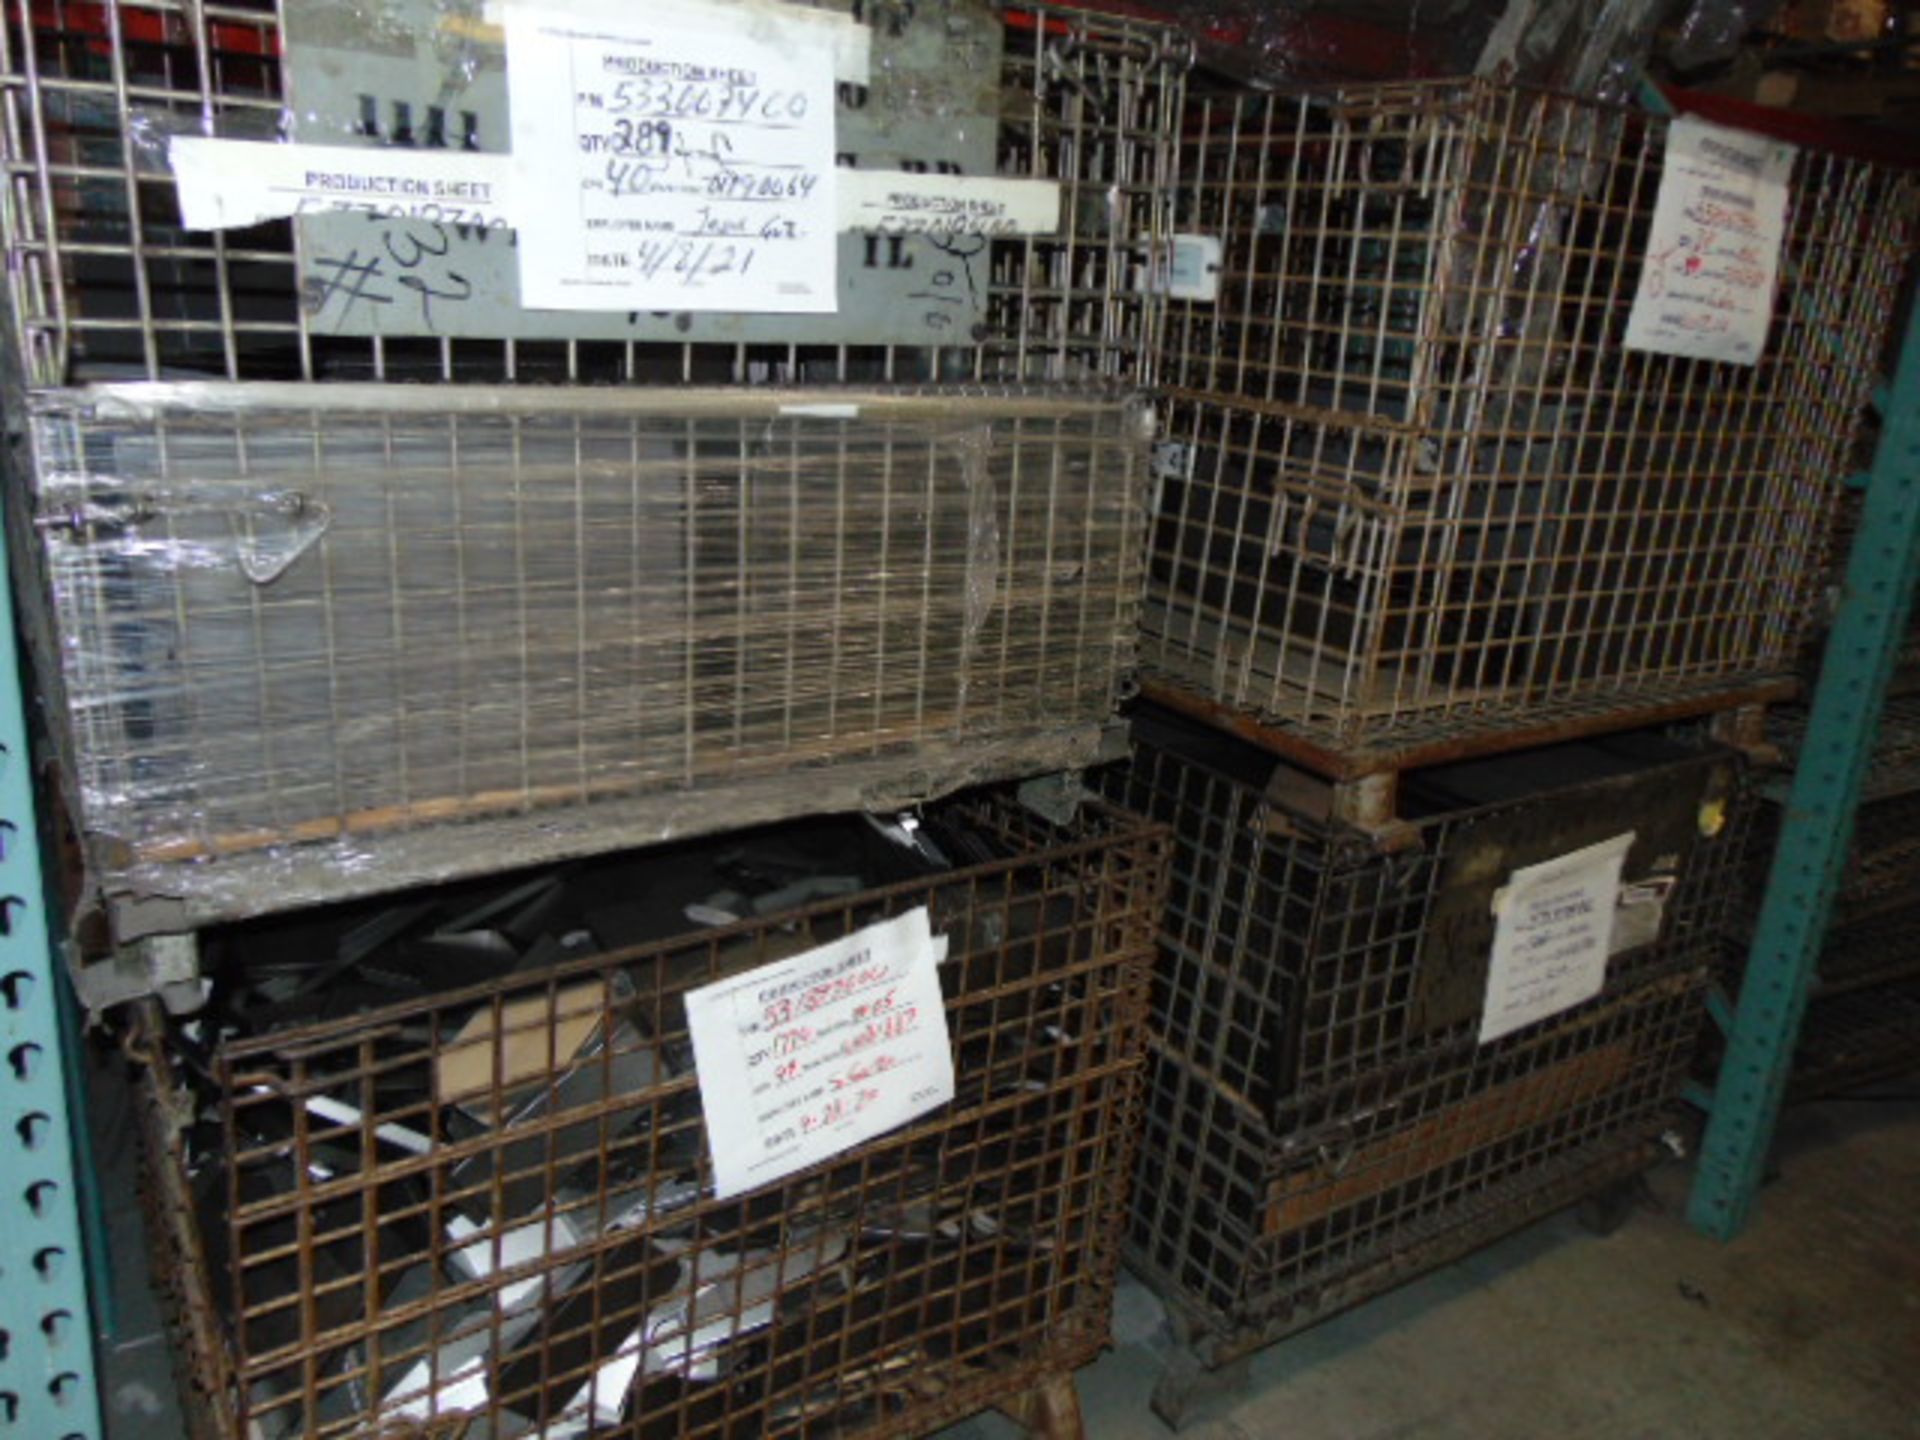 LOT CONSISTING OF: assorted steel in process parts, wire baskets & cardboard (no dies or racks) ( - Image 20 of 39